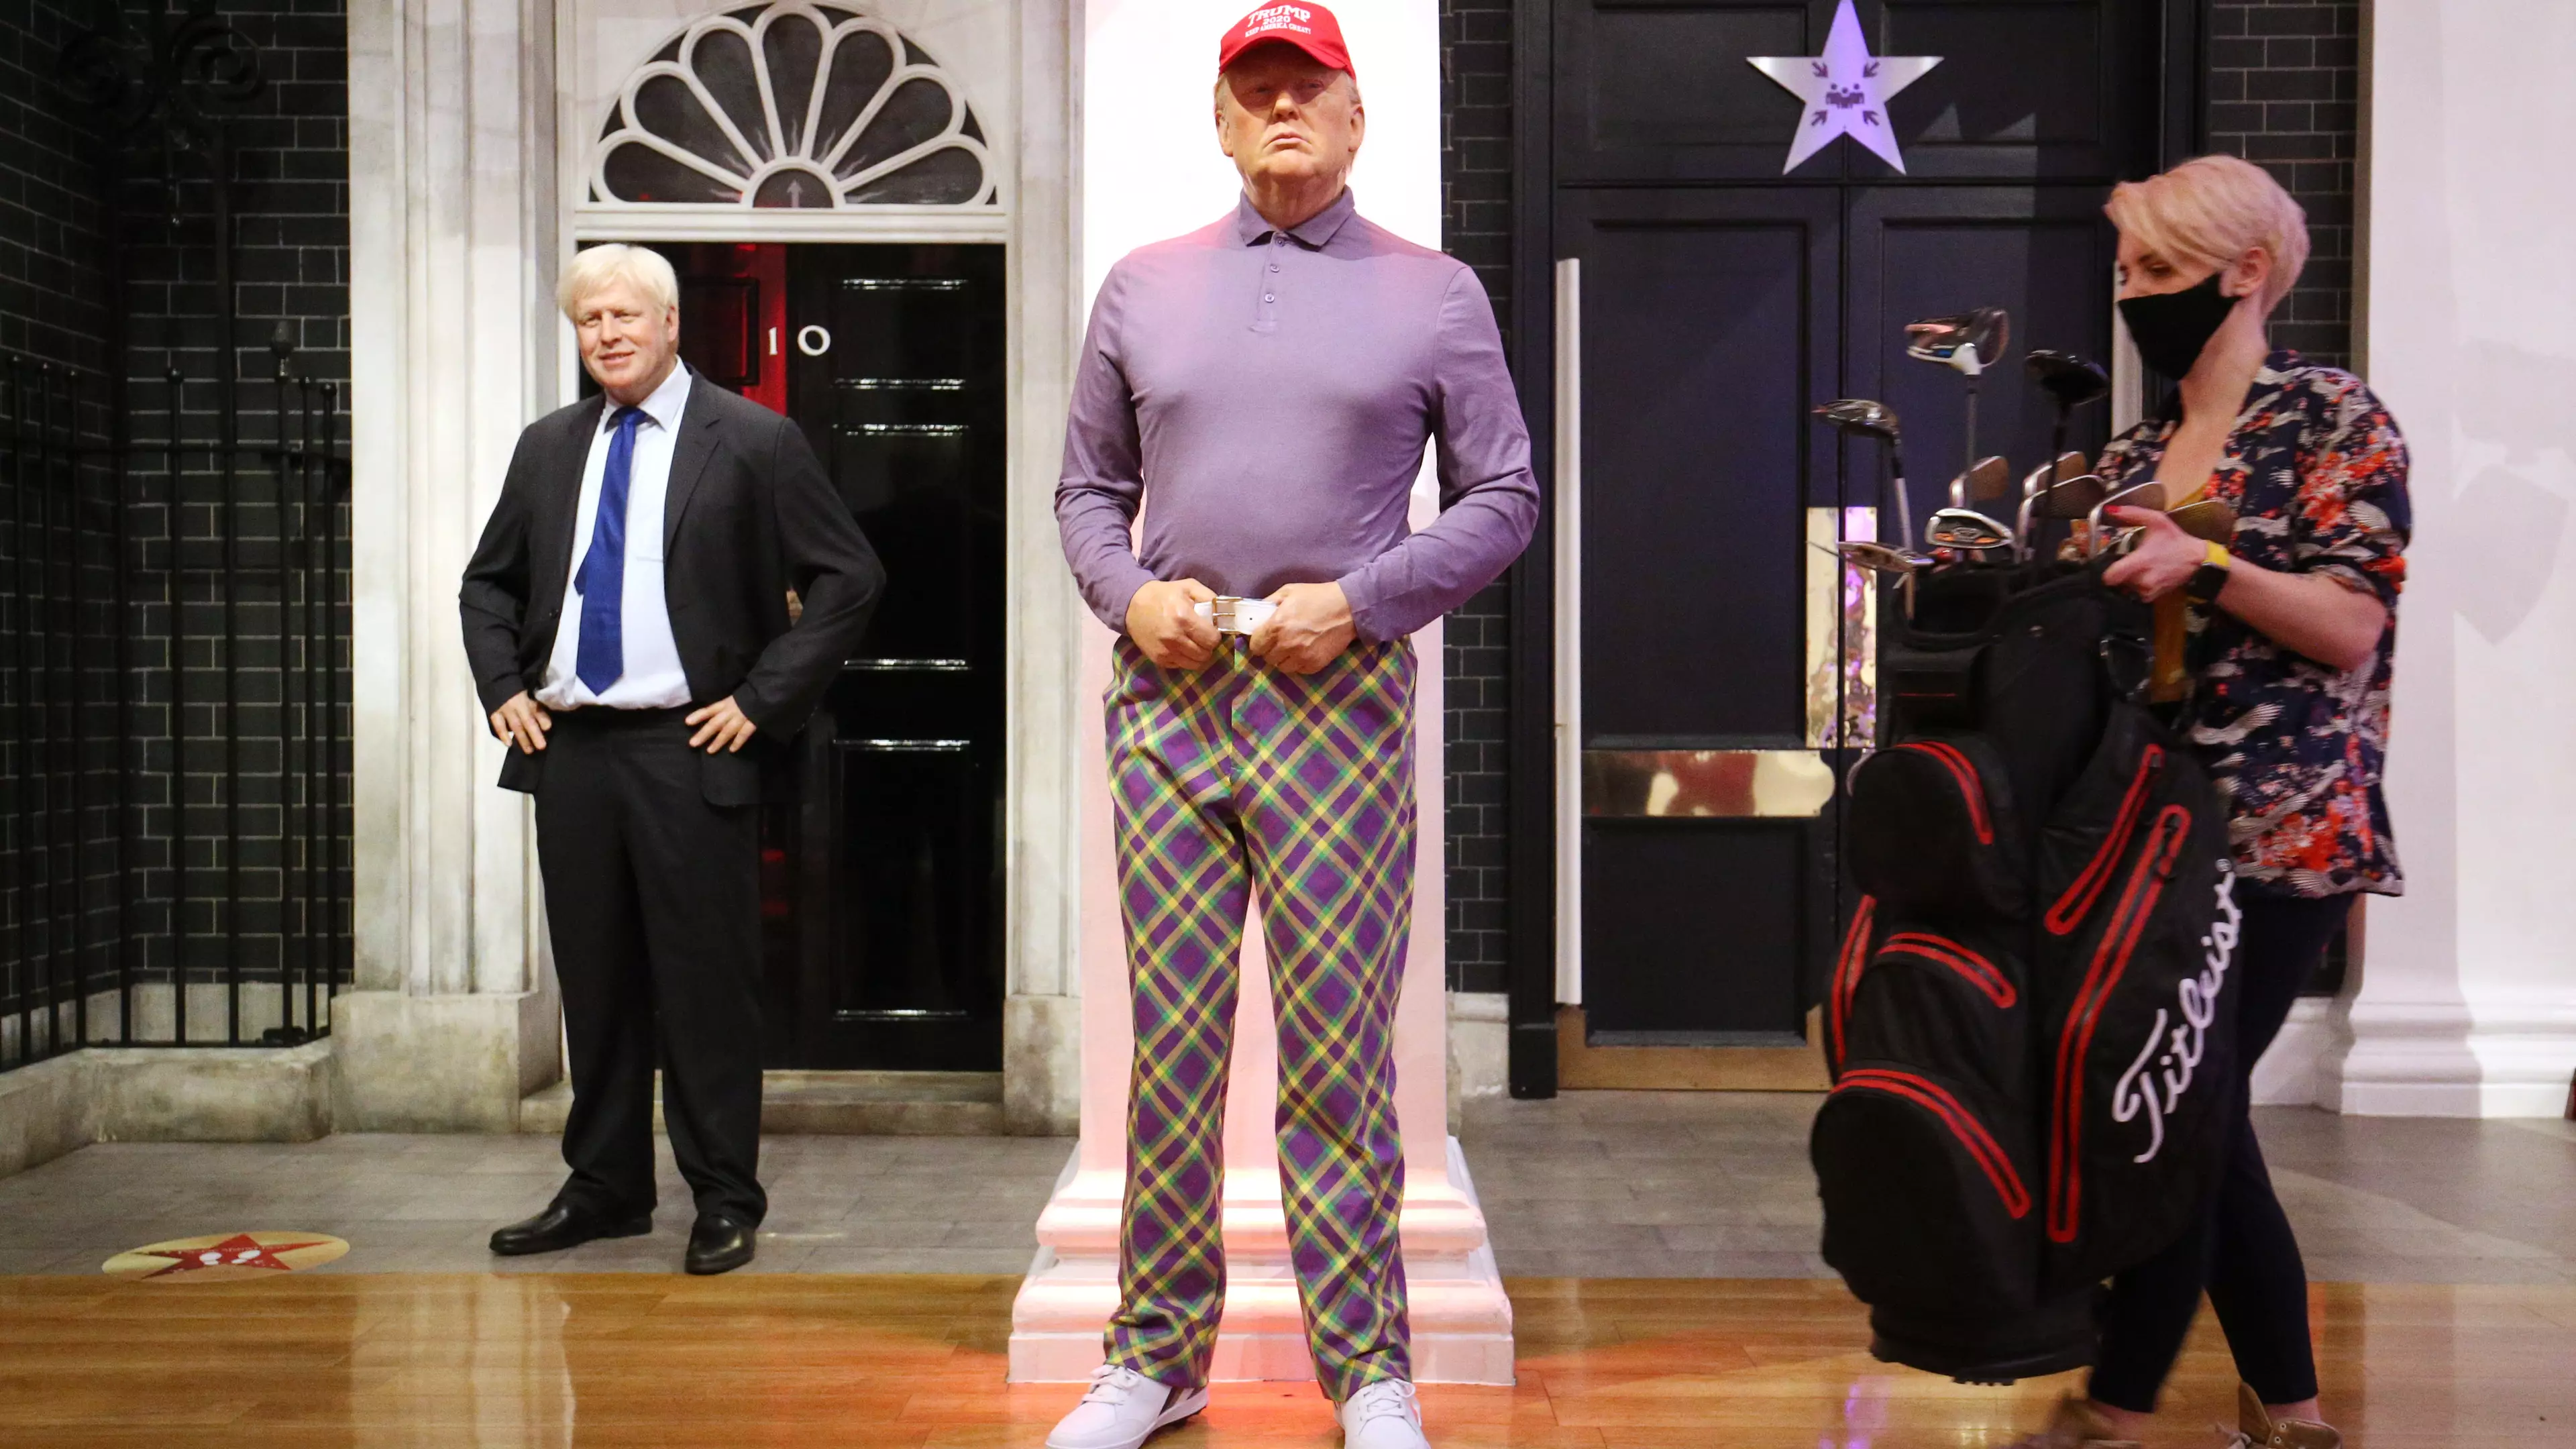 Madame Tussauds Put Trump In Golfing Outfit After Election Defeat 